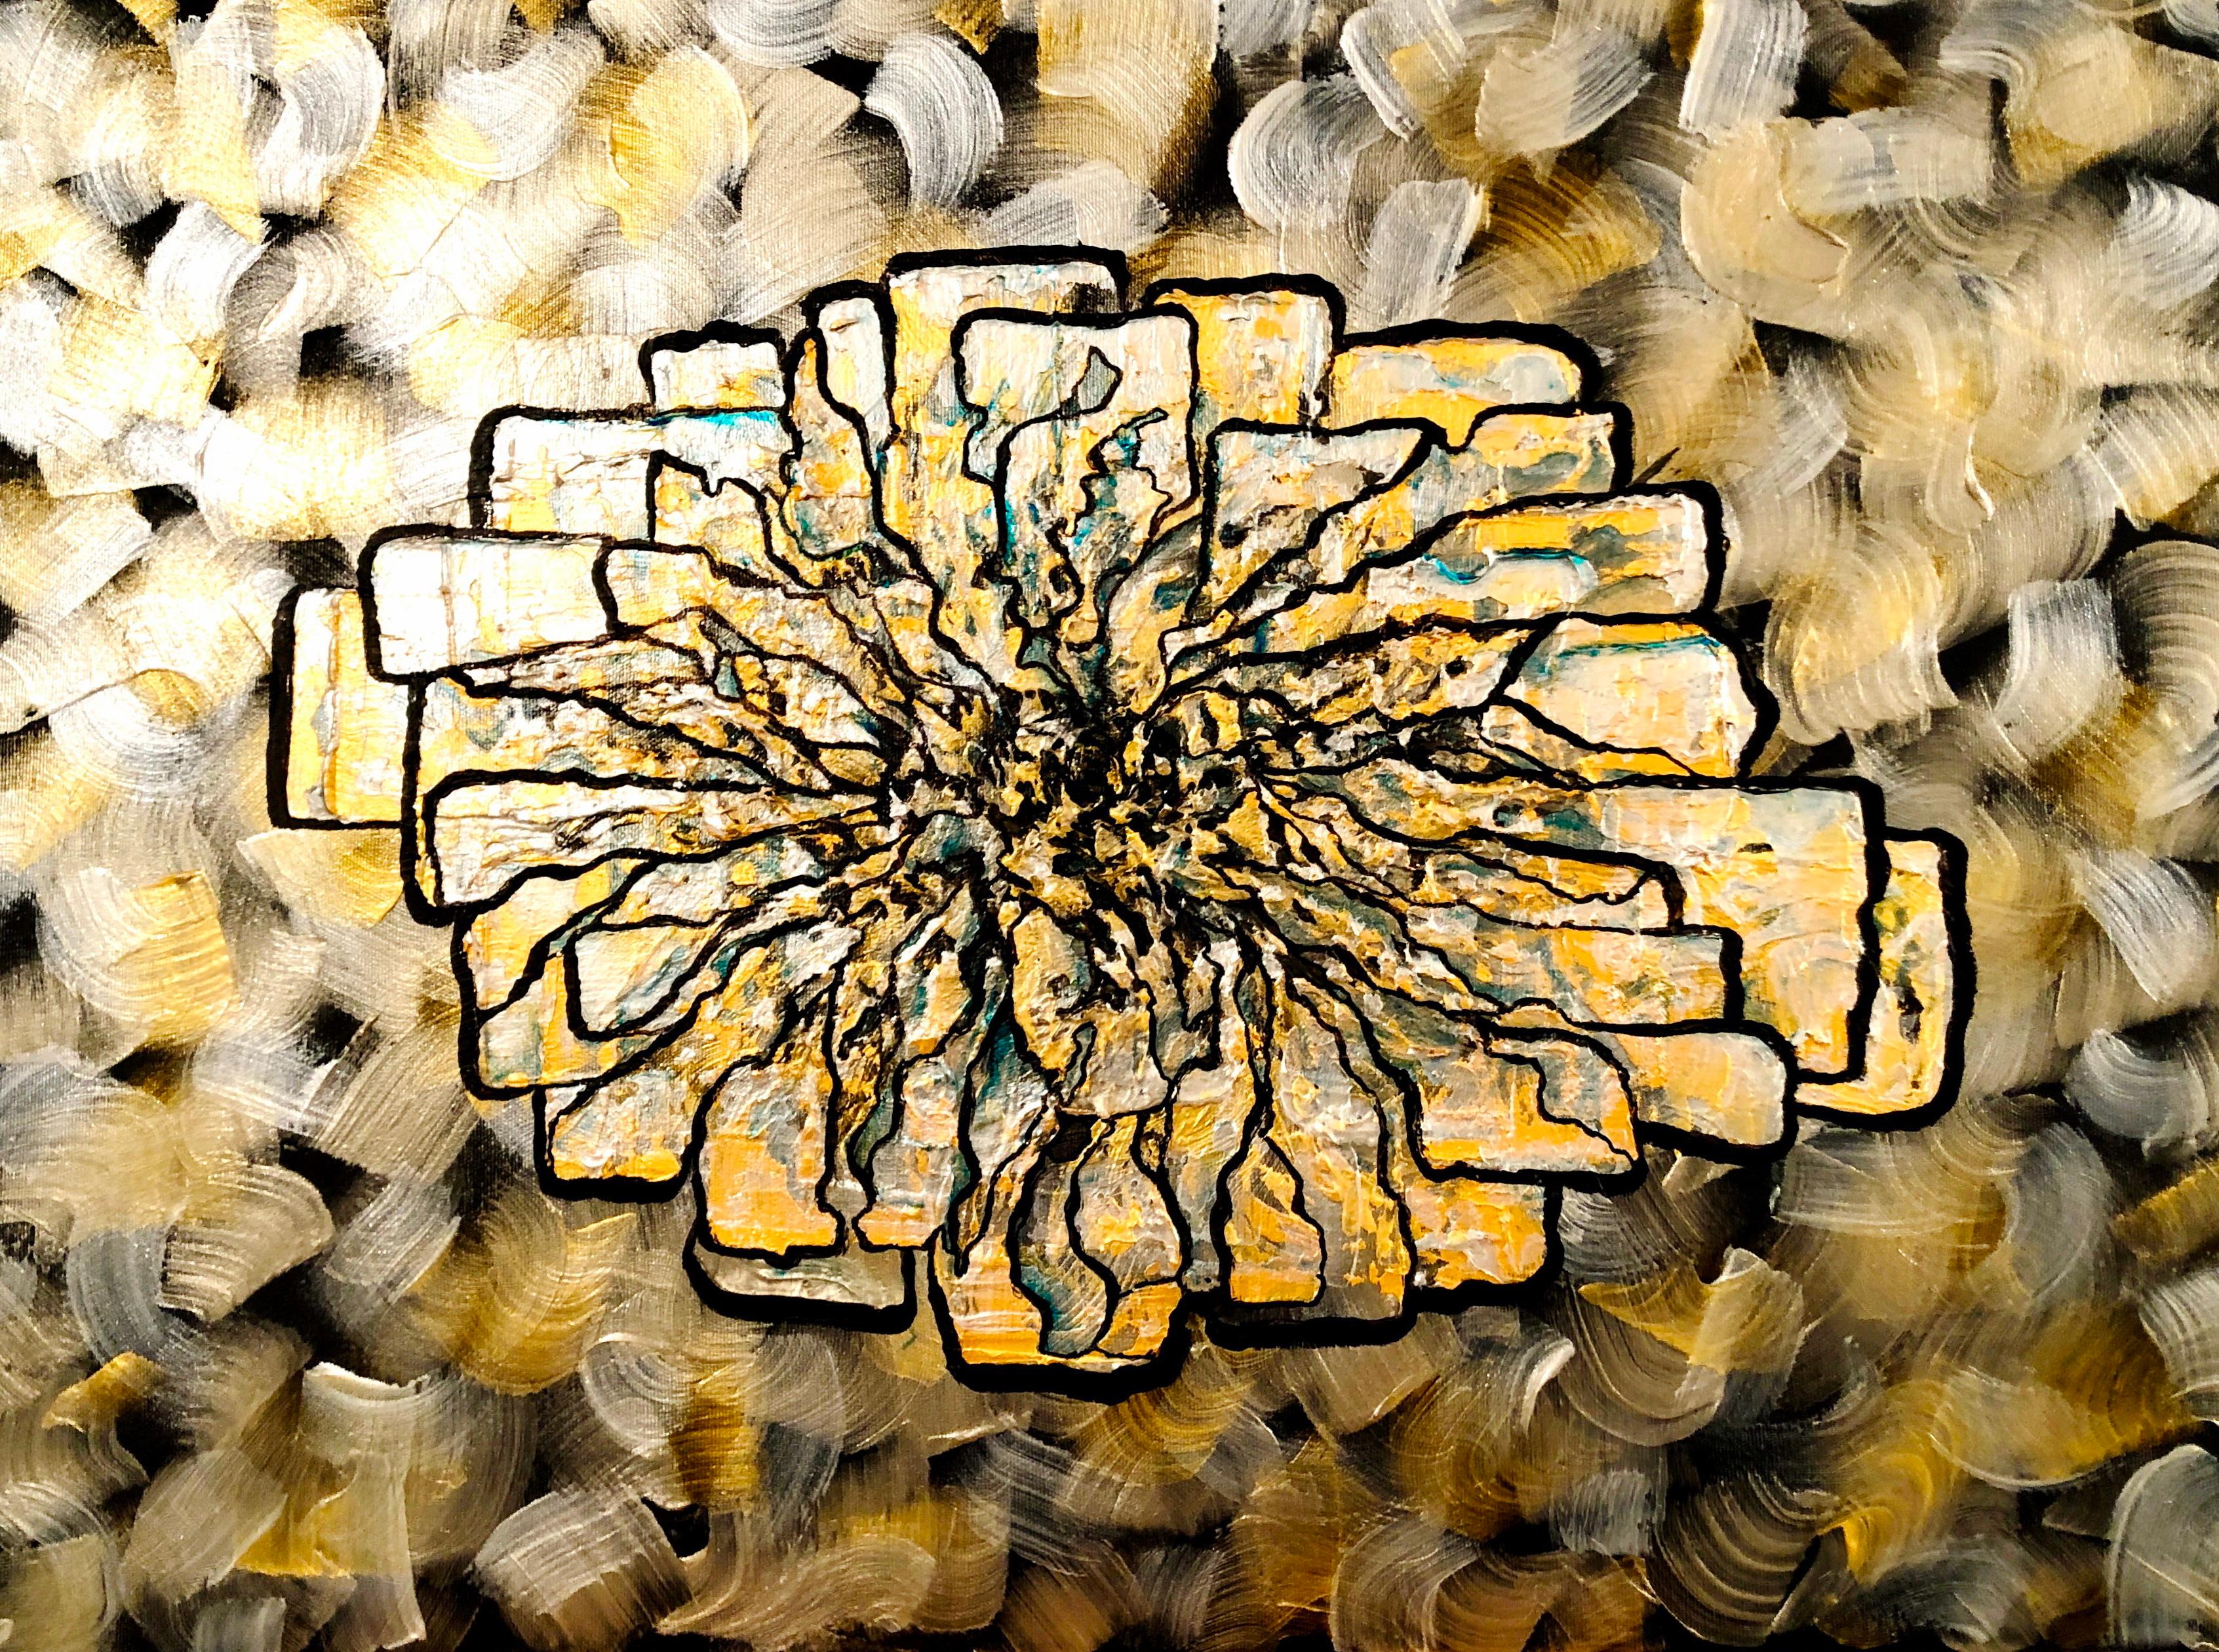  The golden flower of prosperity. - Abstract Expressionist Mixed Media Art by Vik Schroeder 